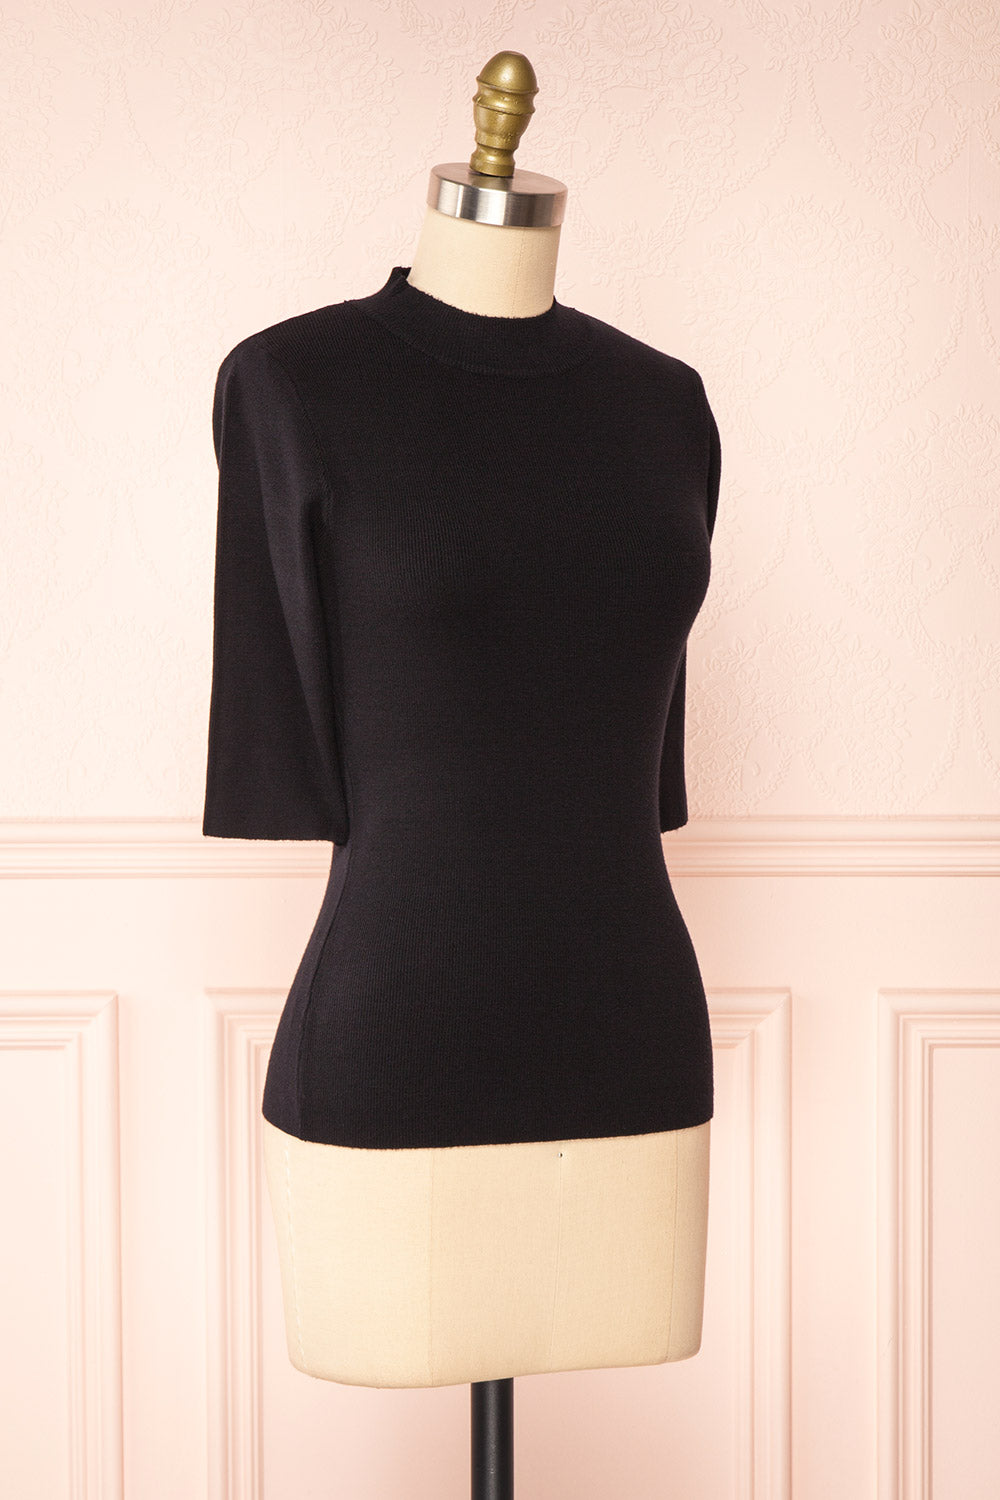 Nalleli Black Fitted Mock Top w/ Half Sleeves | Boutique 1861 side view